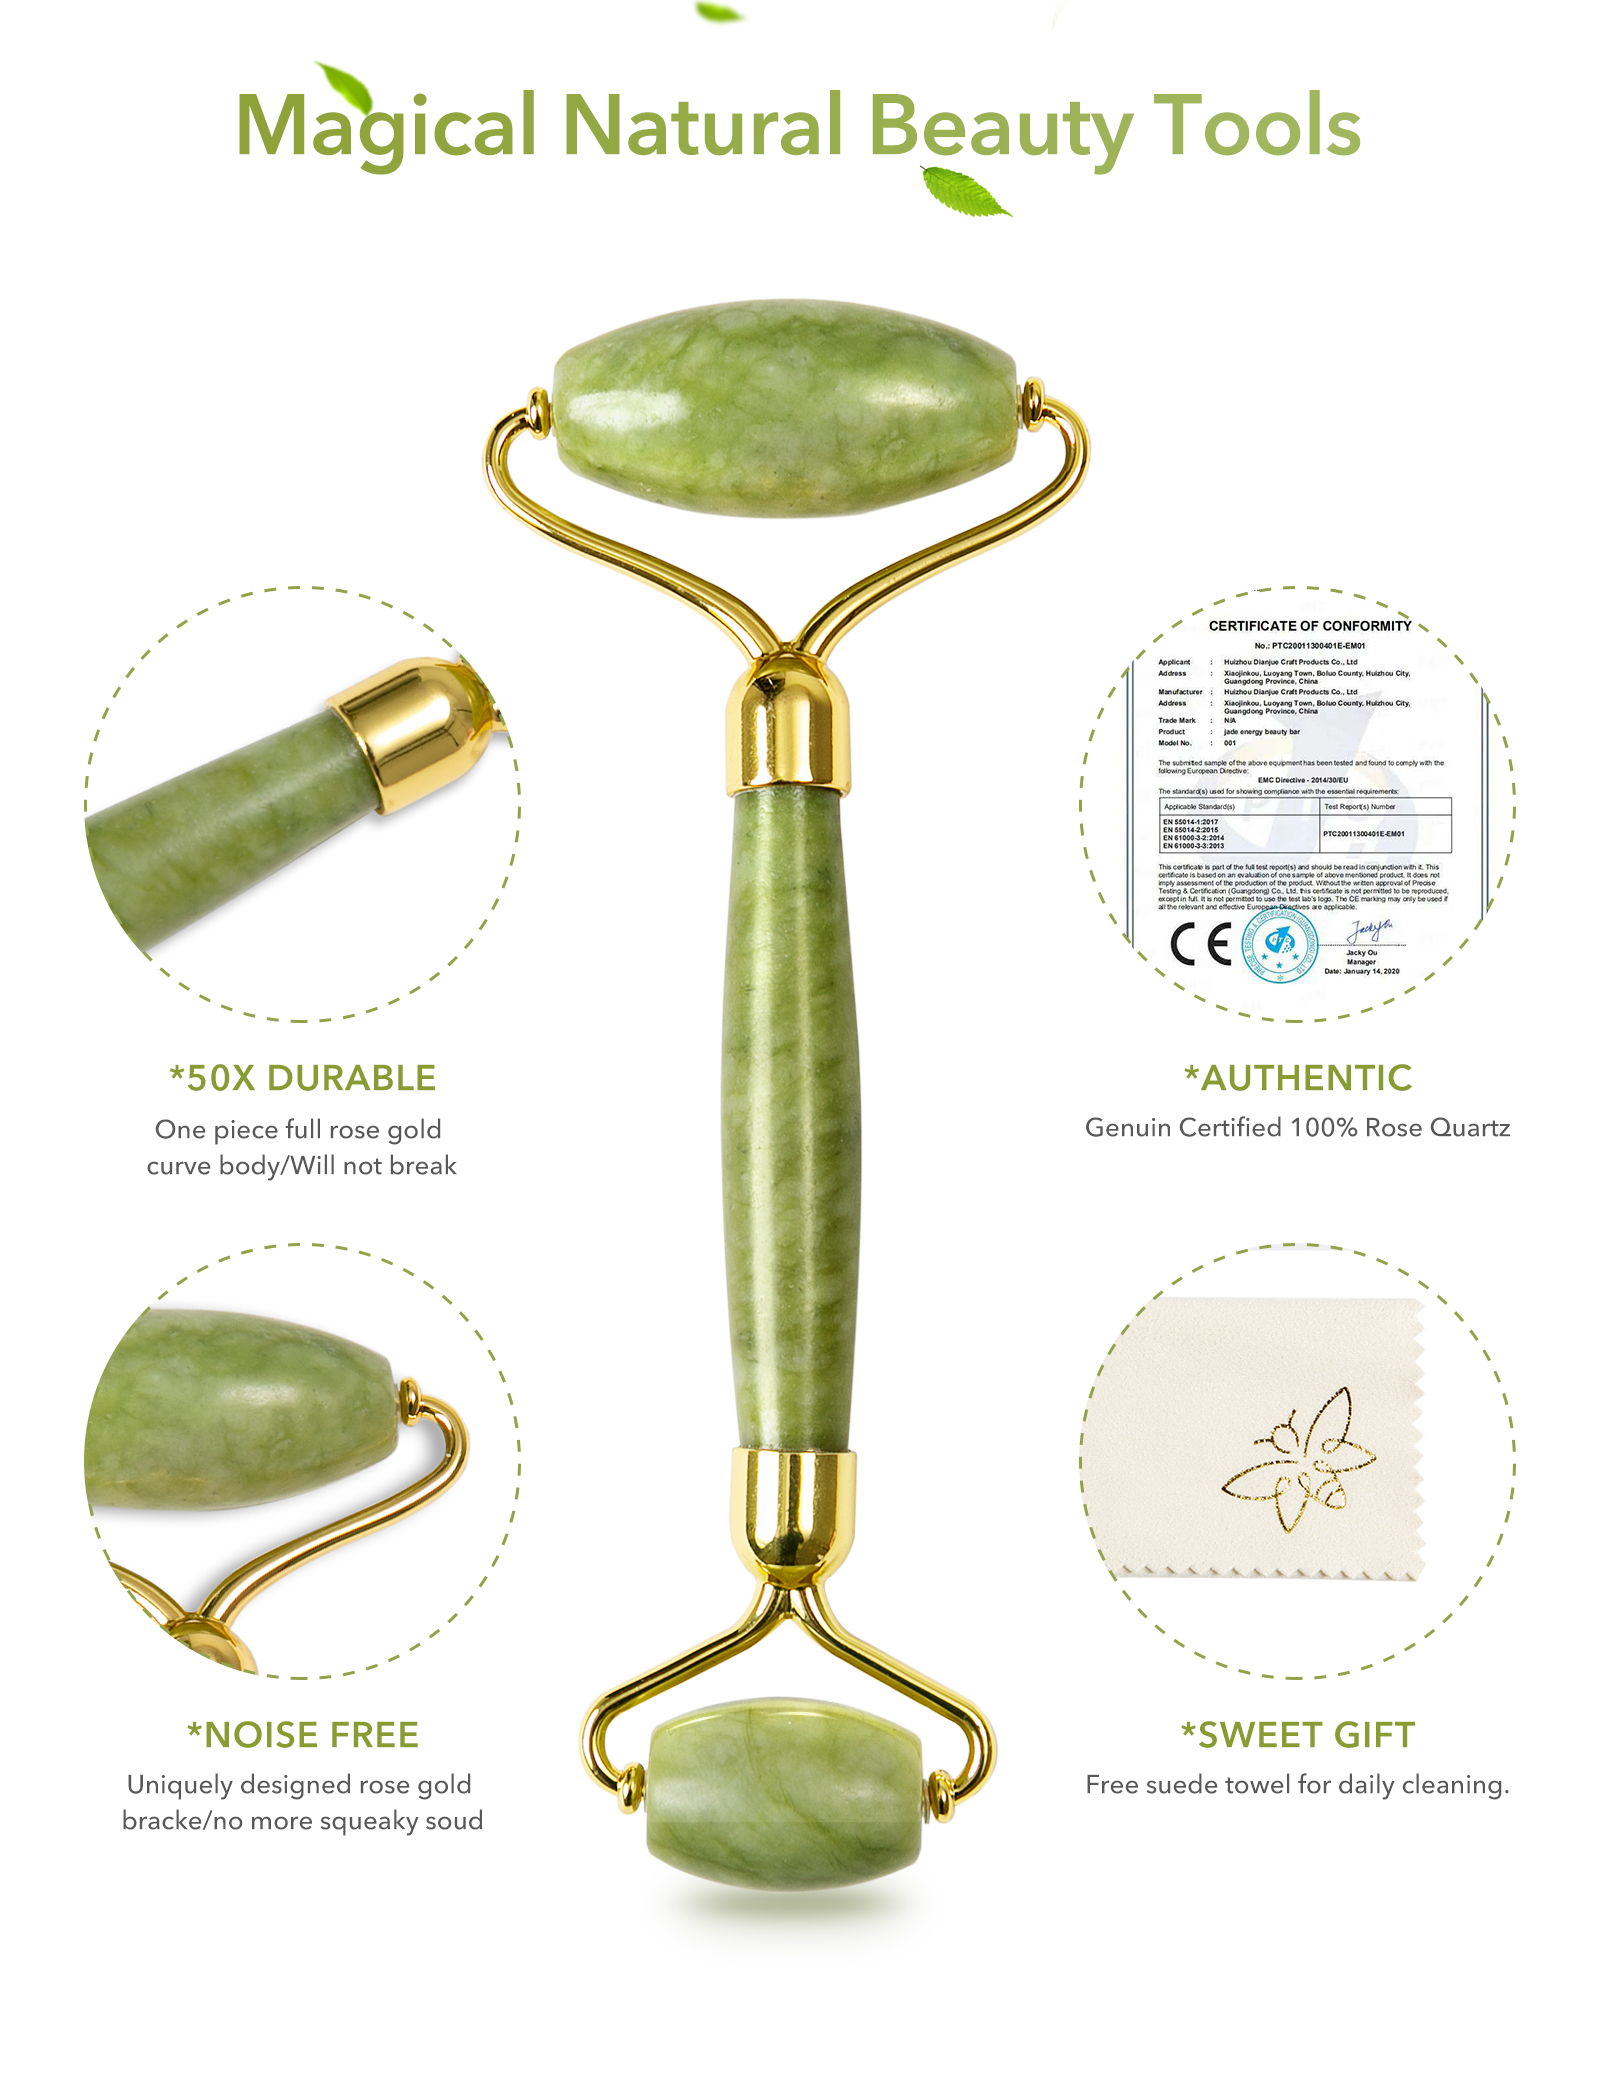 HANABEE Women Gua Sha Jade, Face Roller for Puffy Eyes, Facial Kit Gift - image 5 of 7